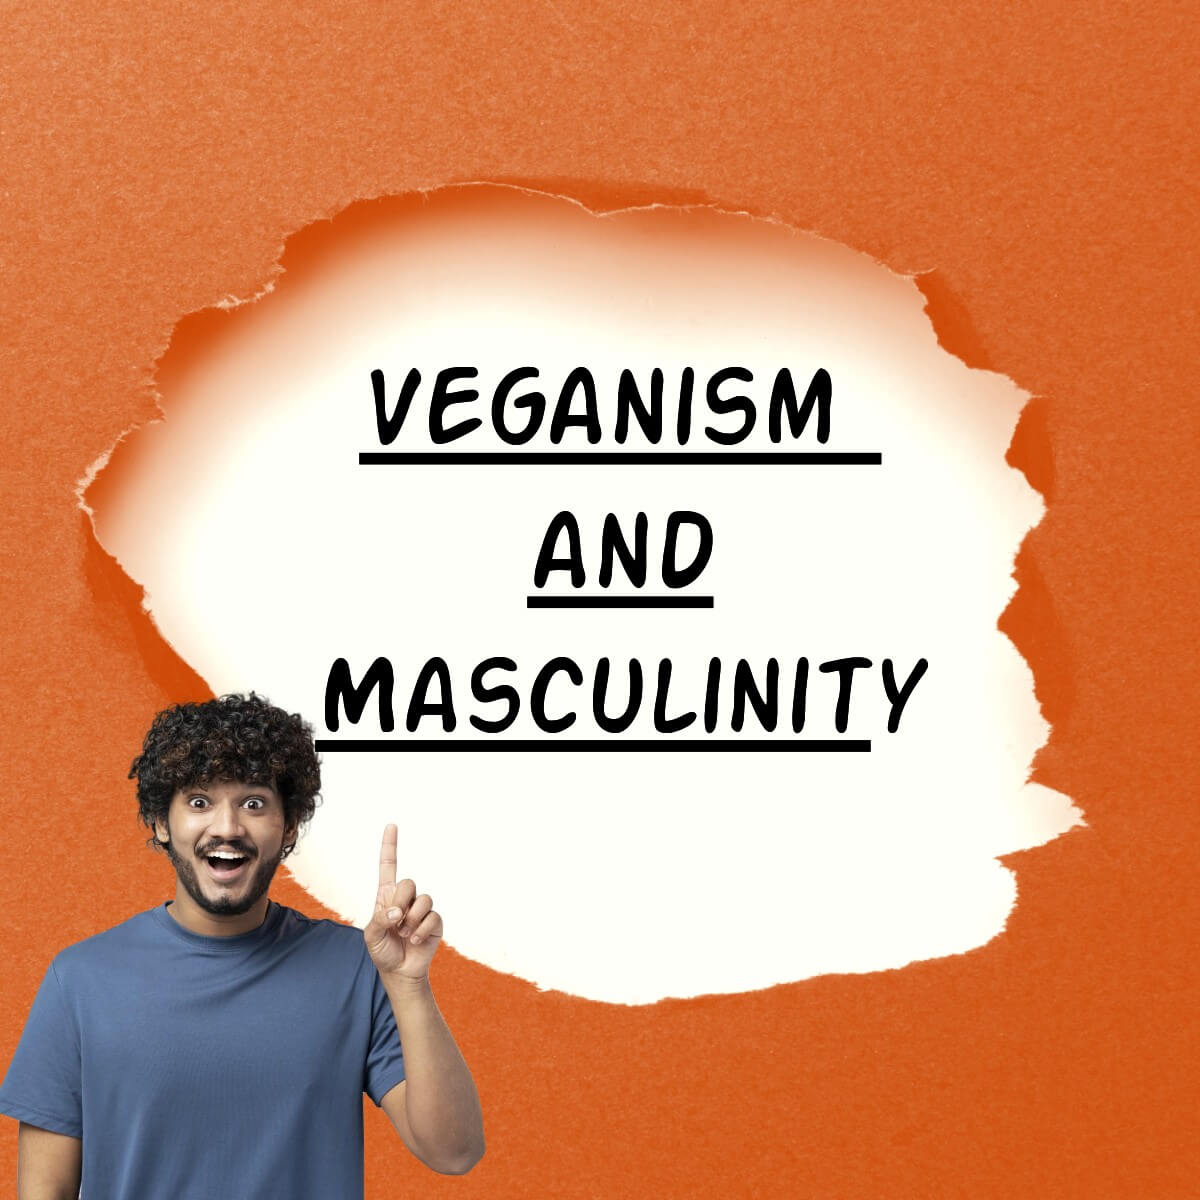 Is a vegan diet a danger to masculinity